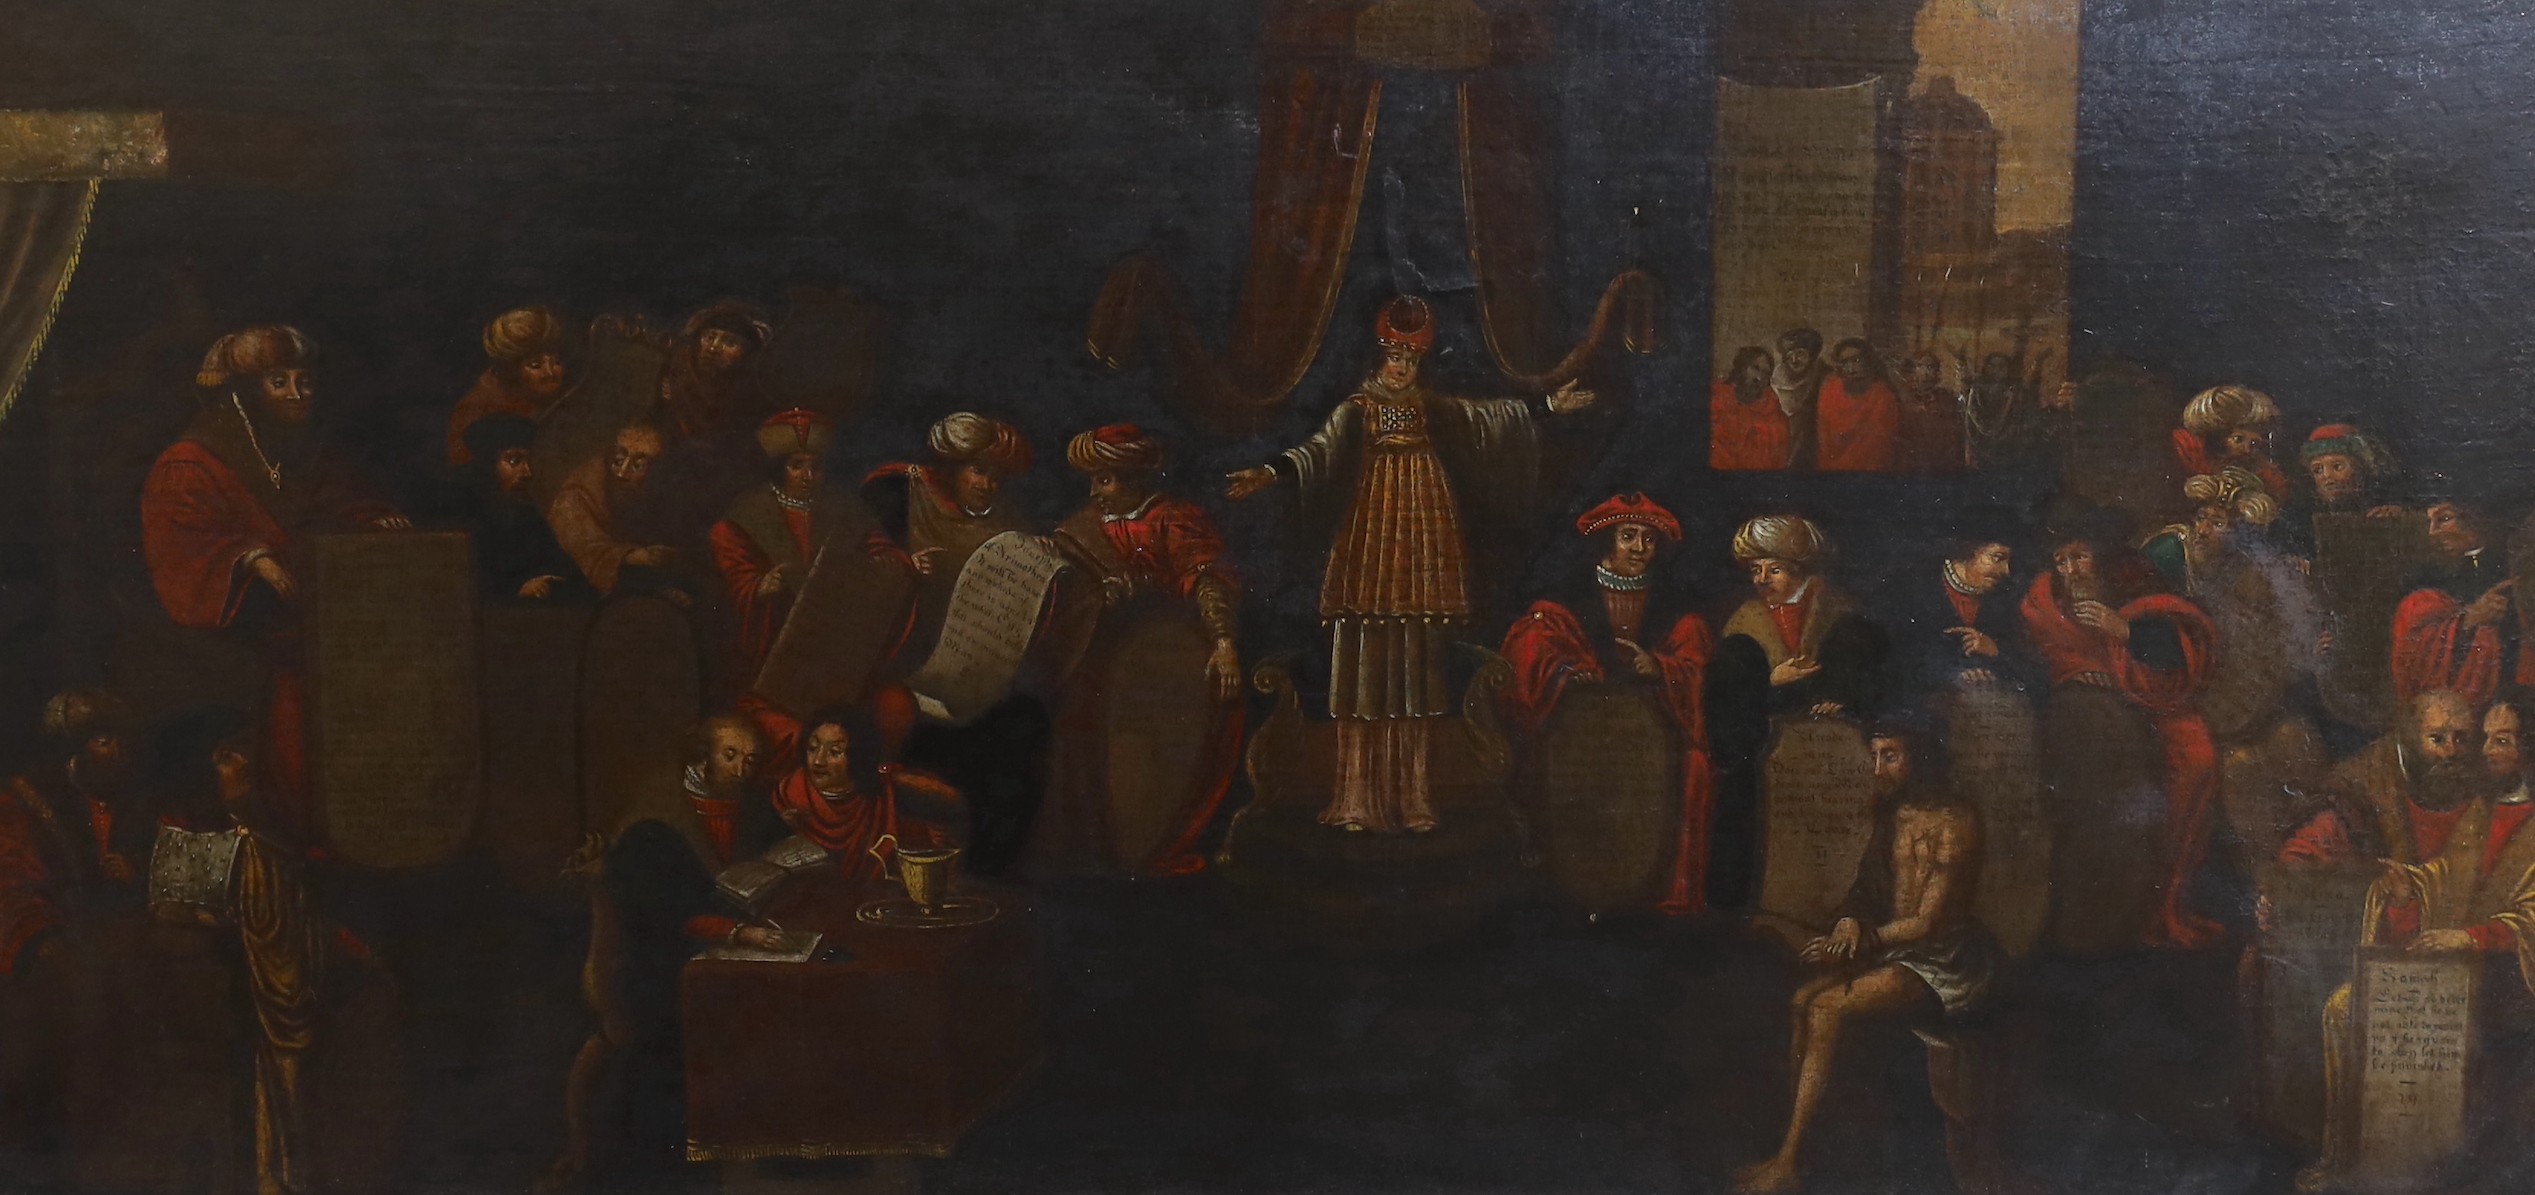 Mid 17th Century English School, Christ before Pilate and Jewish leaders, including Joseph of Arimathea, with many of the figures holding scrolls on which are writings inscribed in both Hebrew and English., oil on canvas